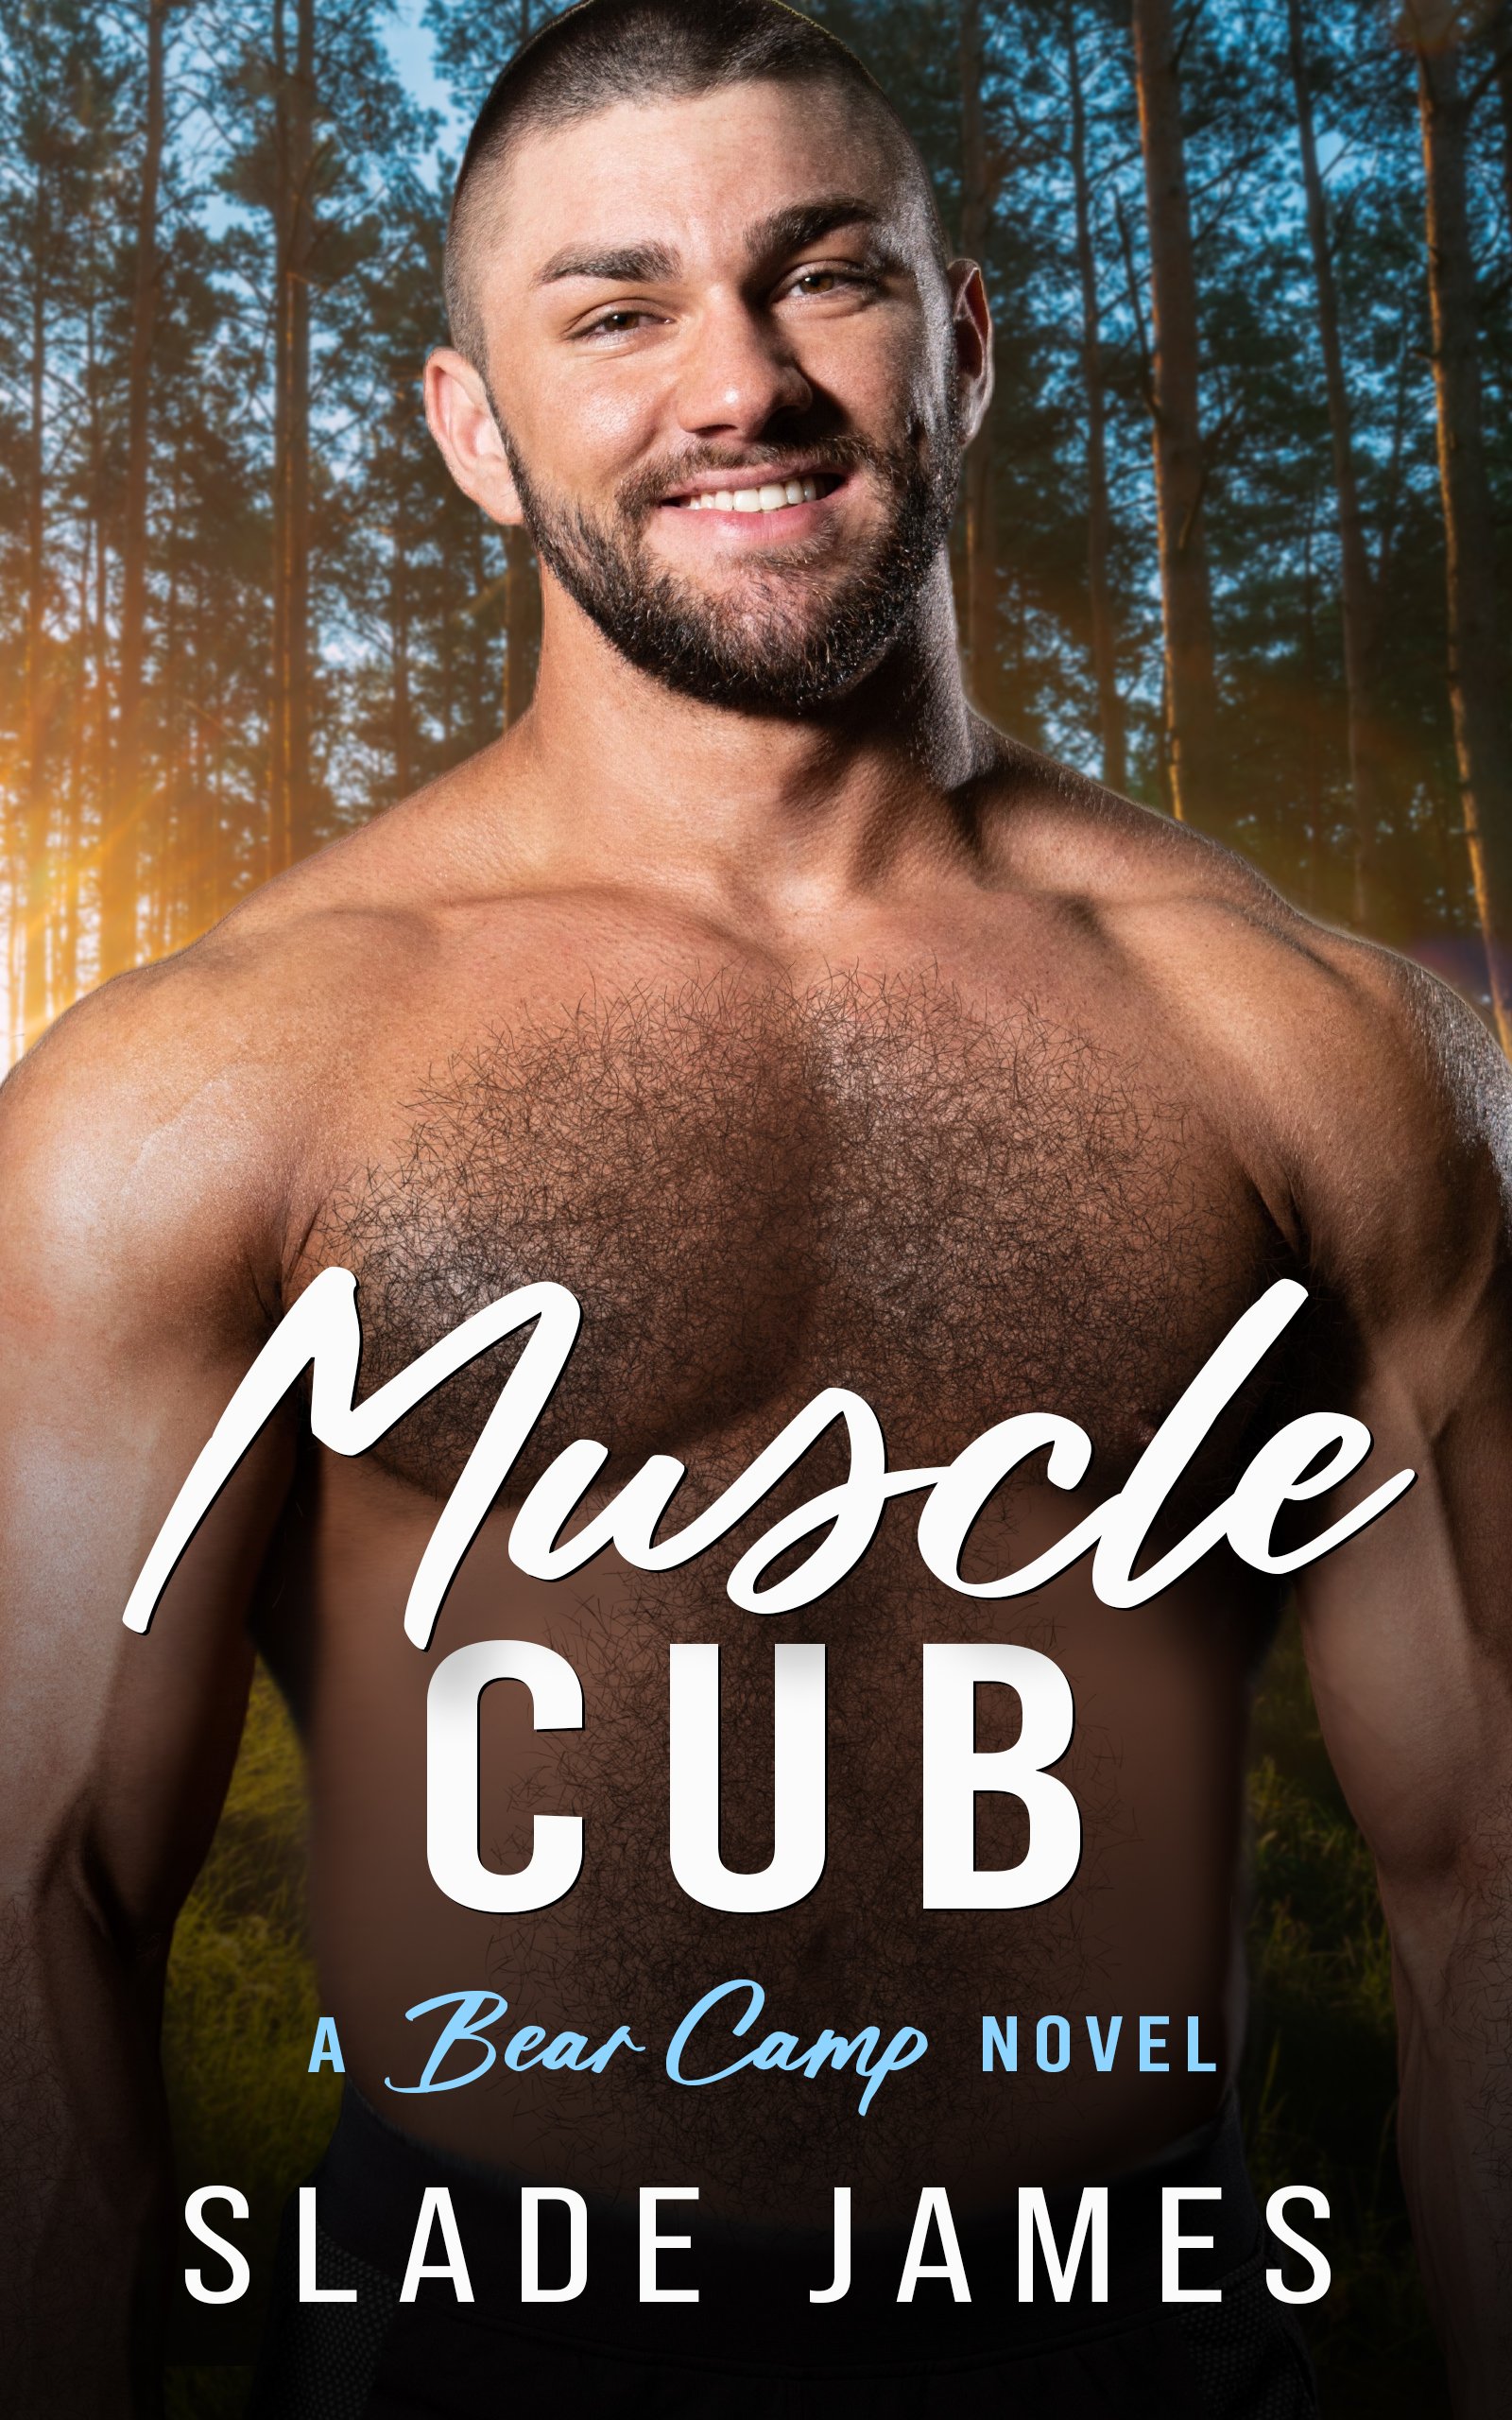 Muscle cubs